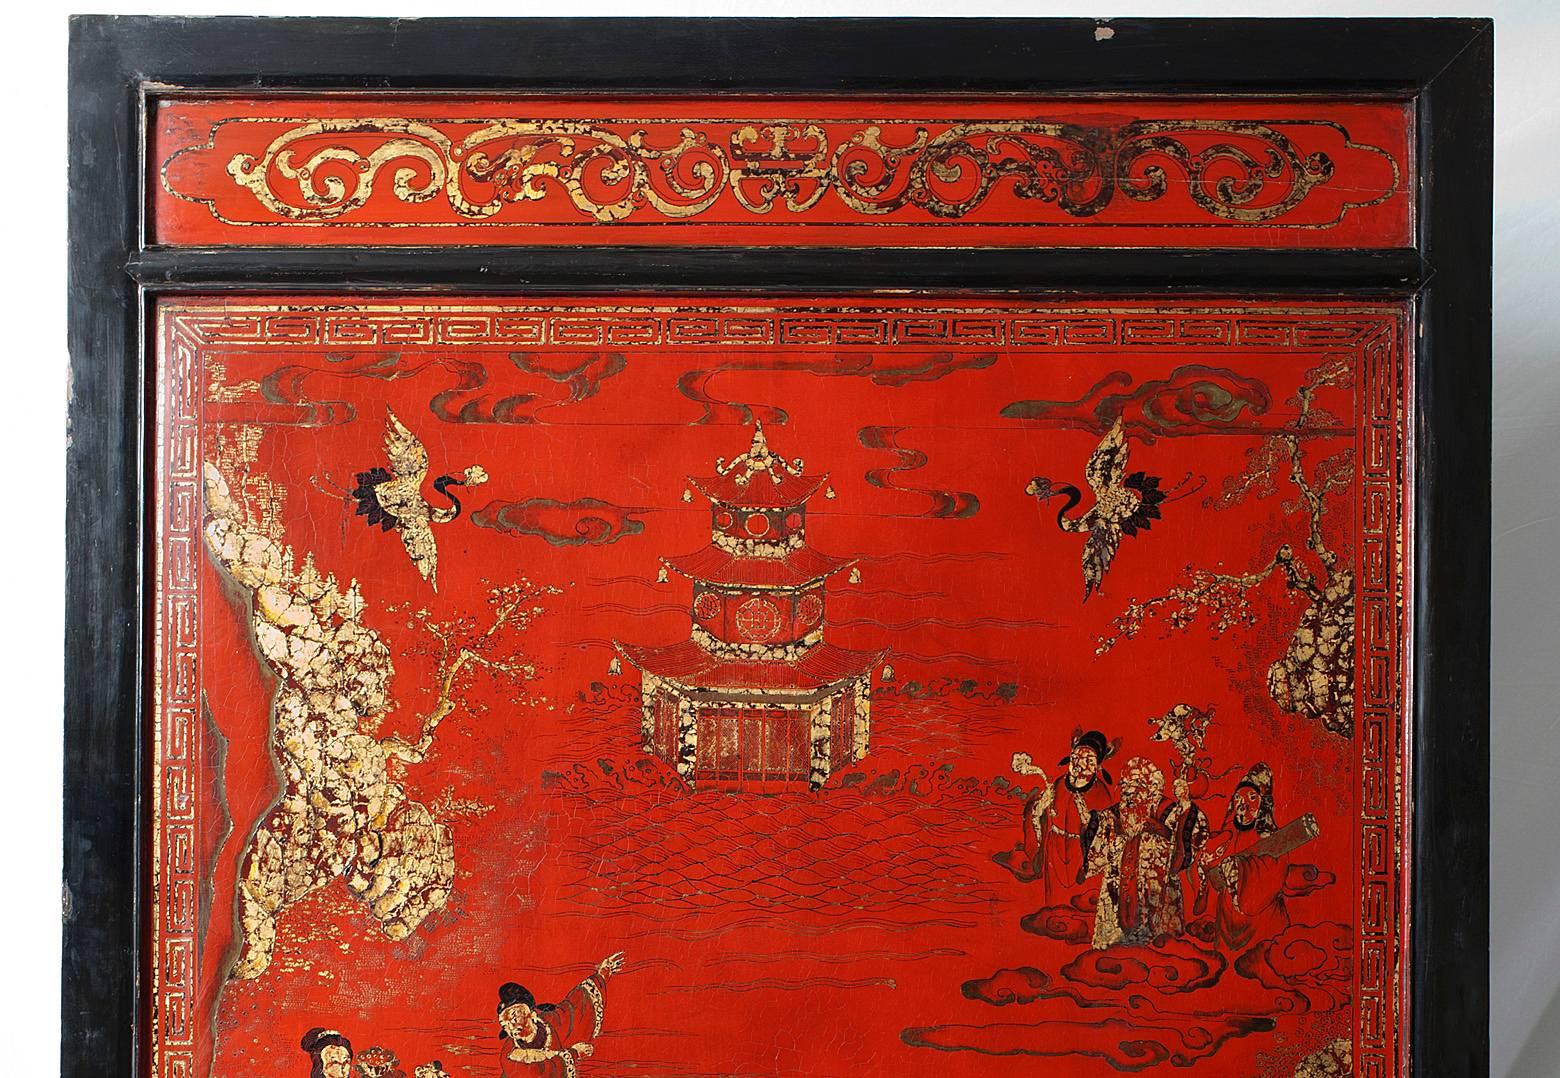 Lacquered Rare Large Chinese Screen, Room Divider, 19th Century, Qing Dynasty, Red Lacquer For Sale